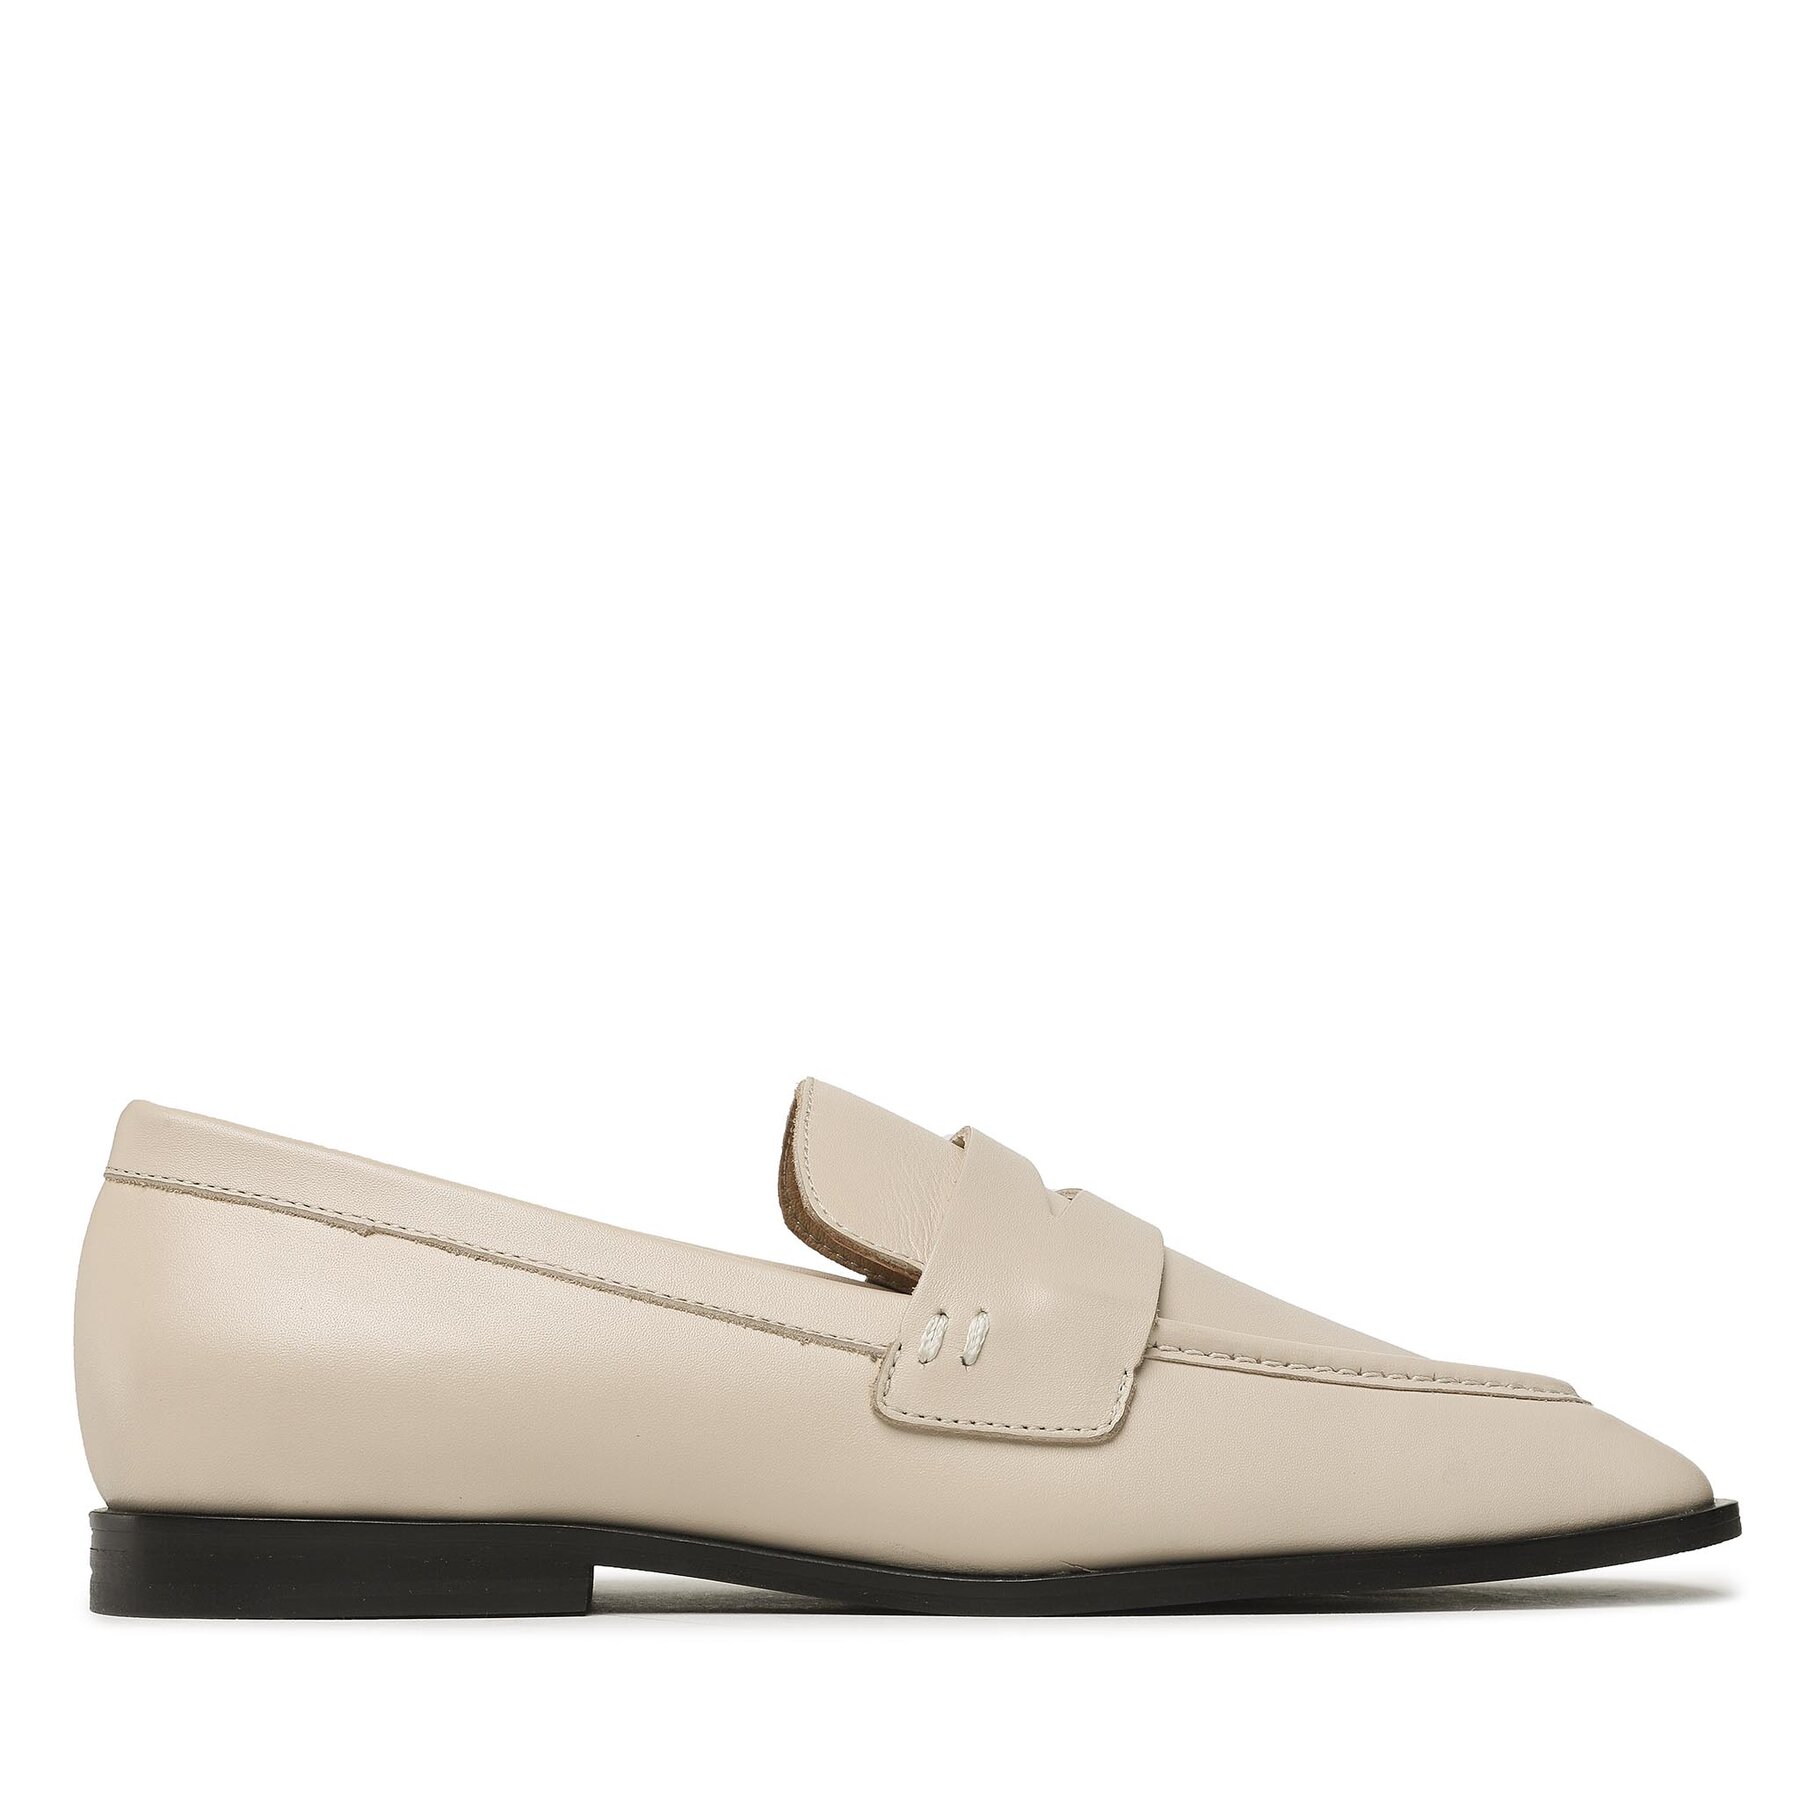 Loaferice Gino Rossi PENELOPE-01 Beige